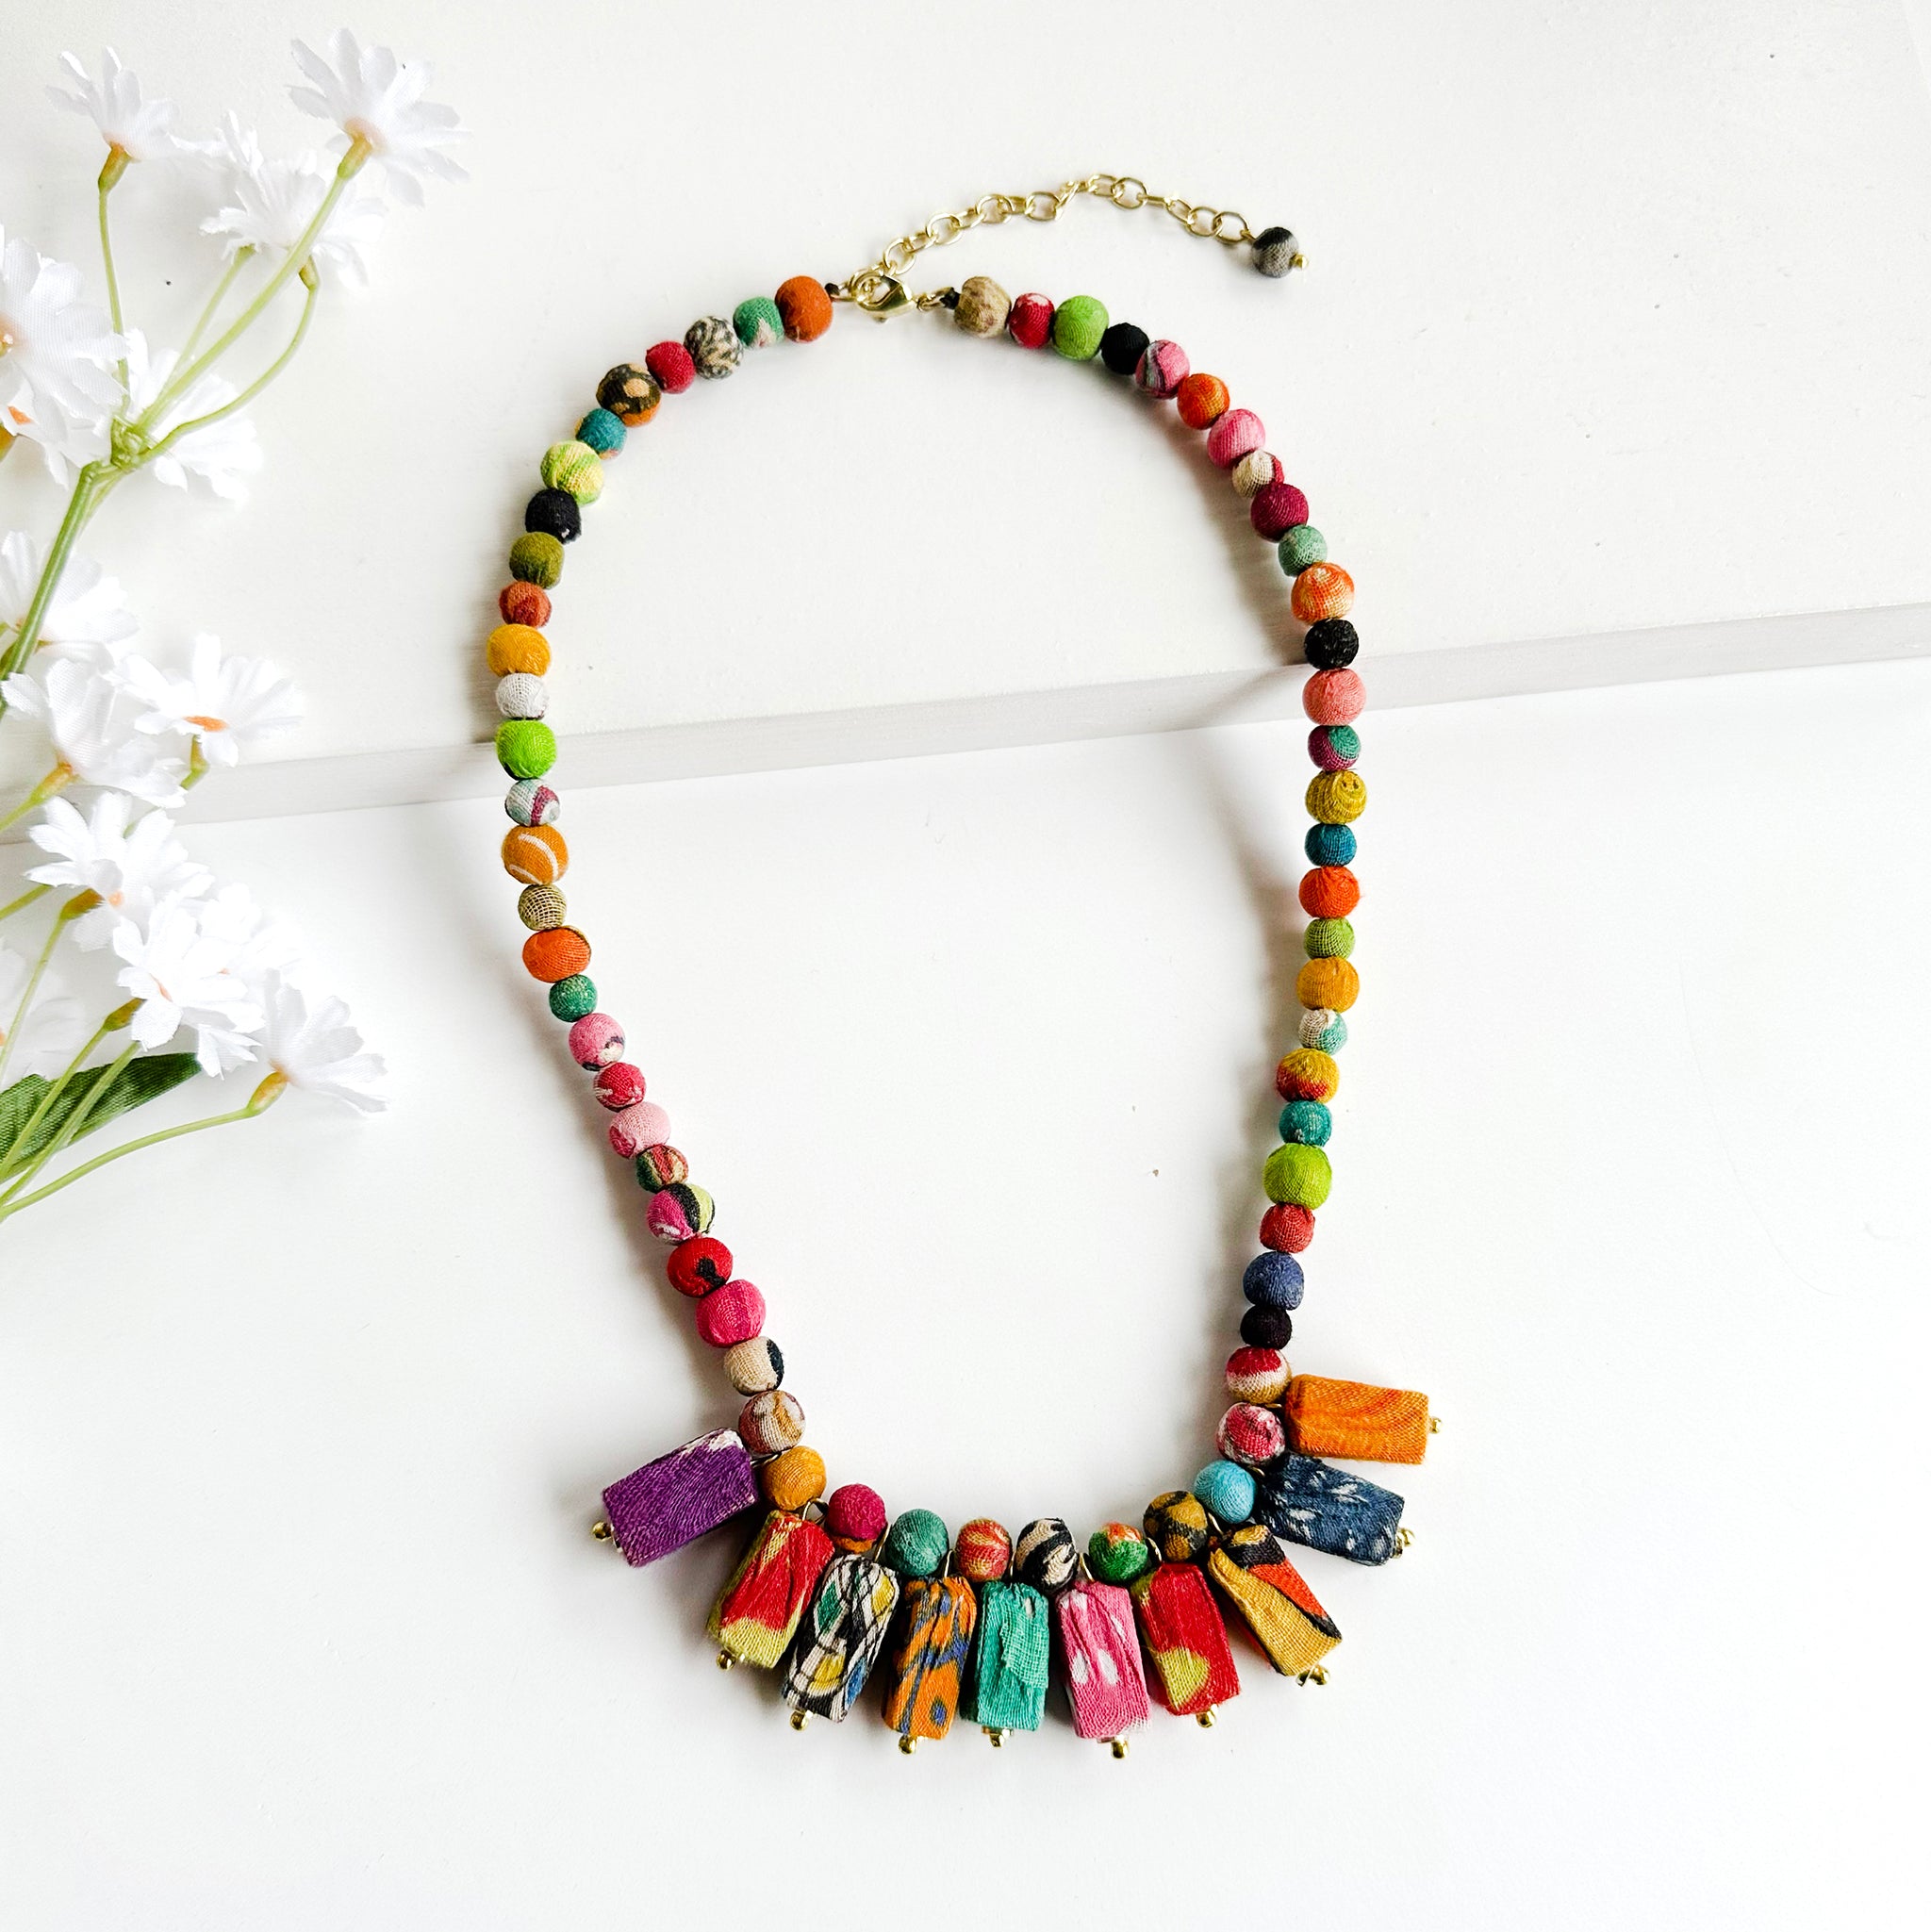 A colorful textile-wrapped beaded necklace features a fan of rectangular beads.